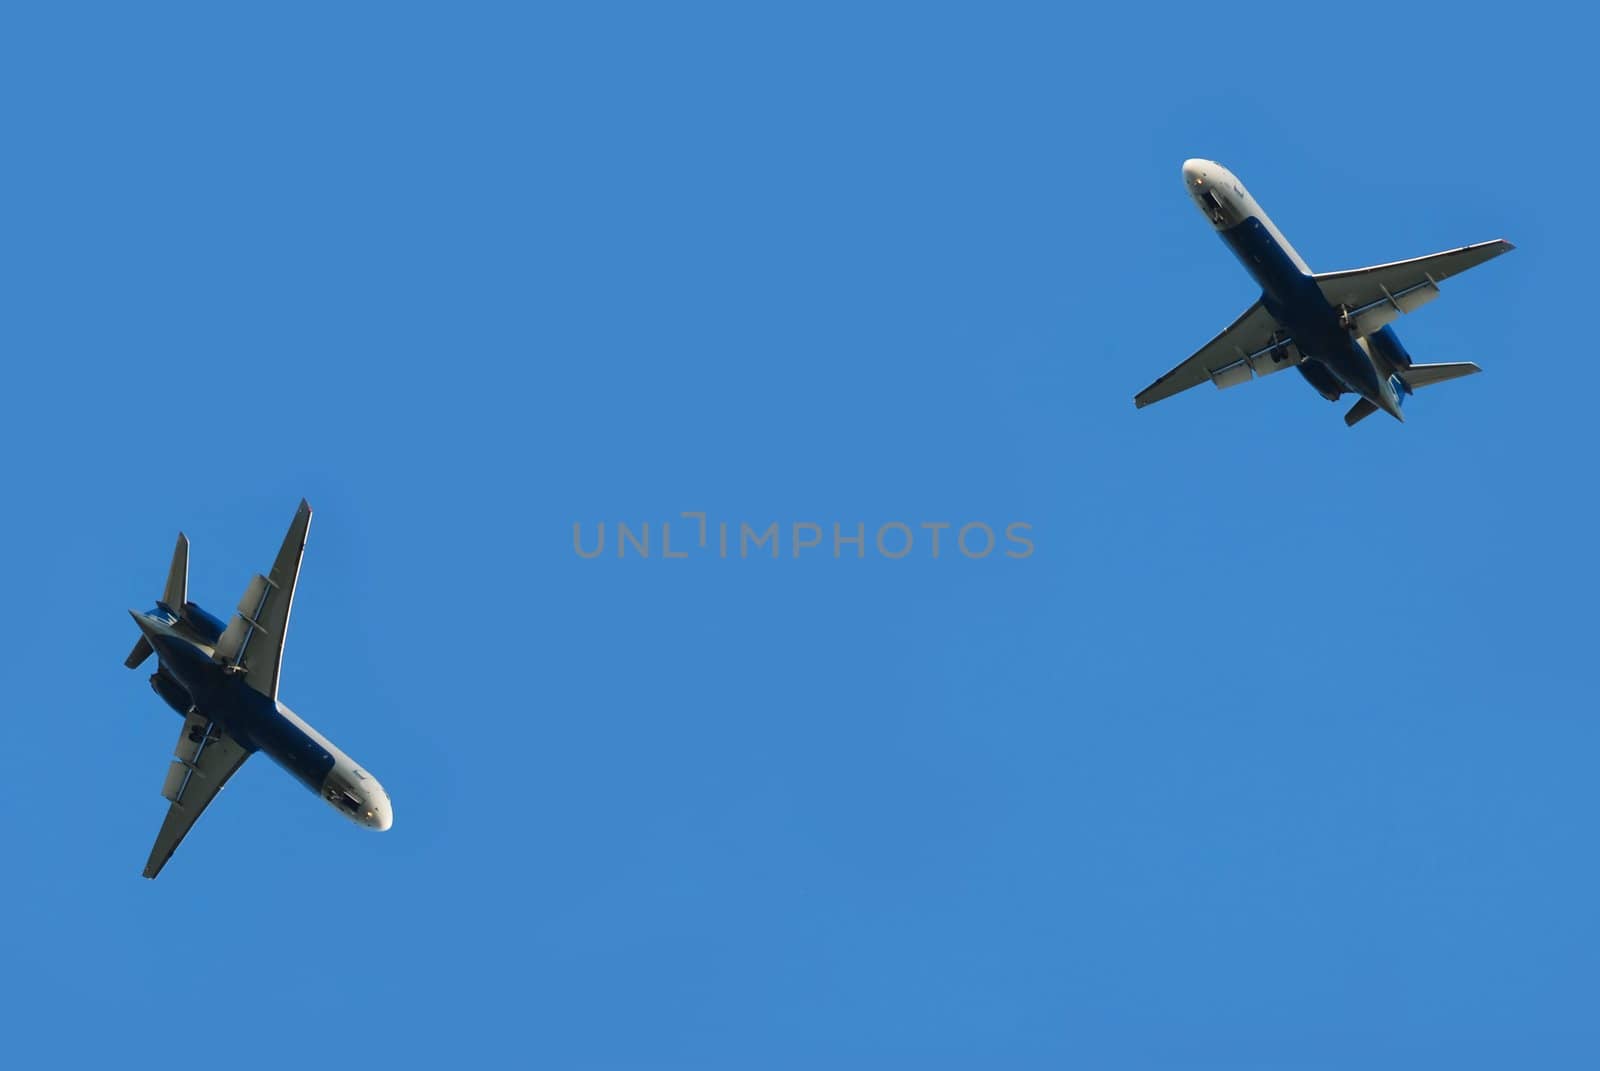 Two flying planes by simply